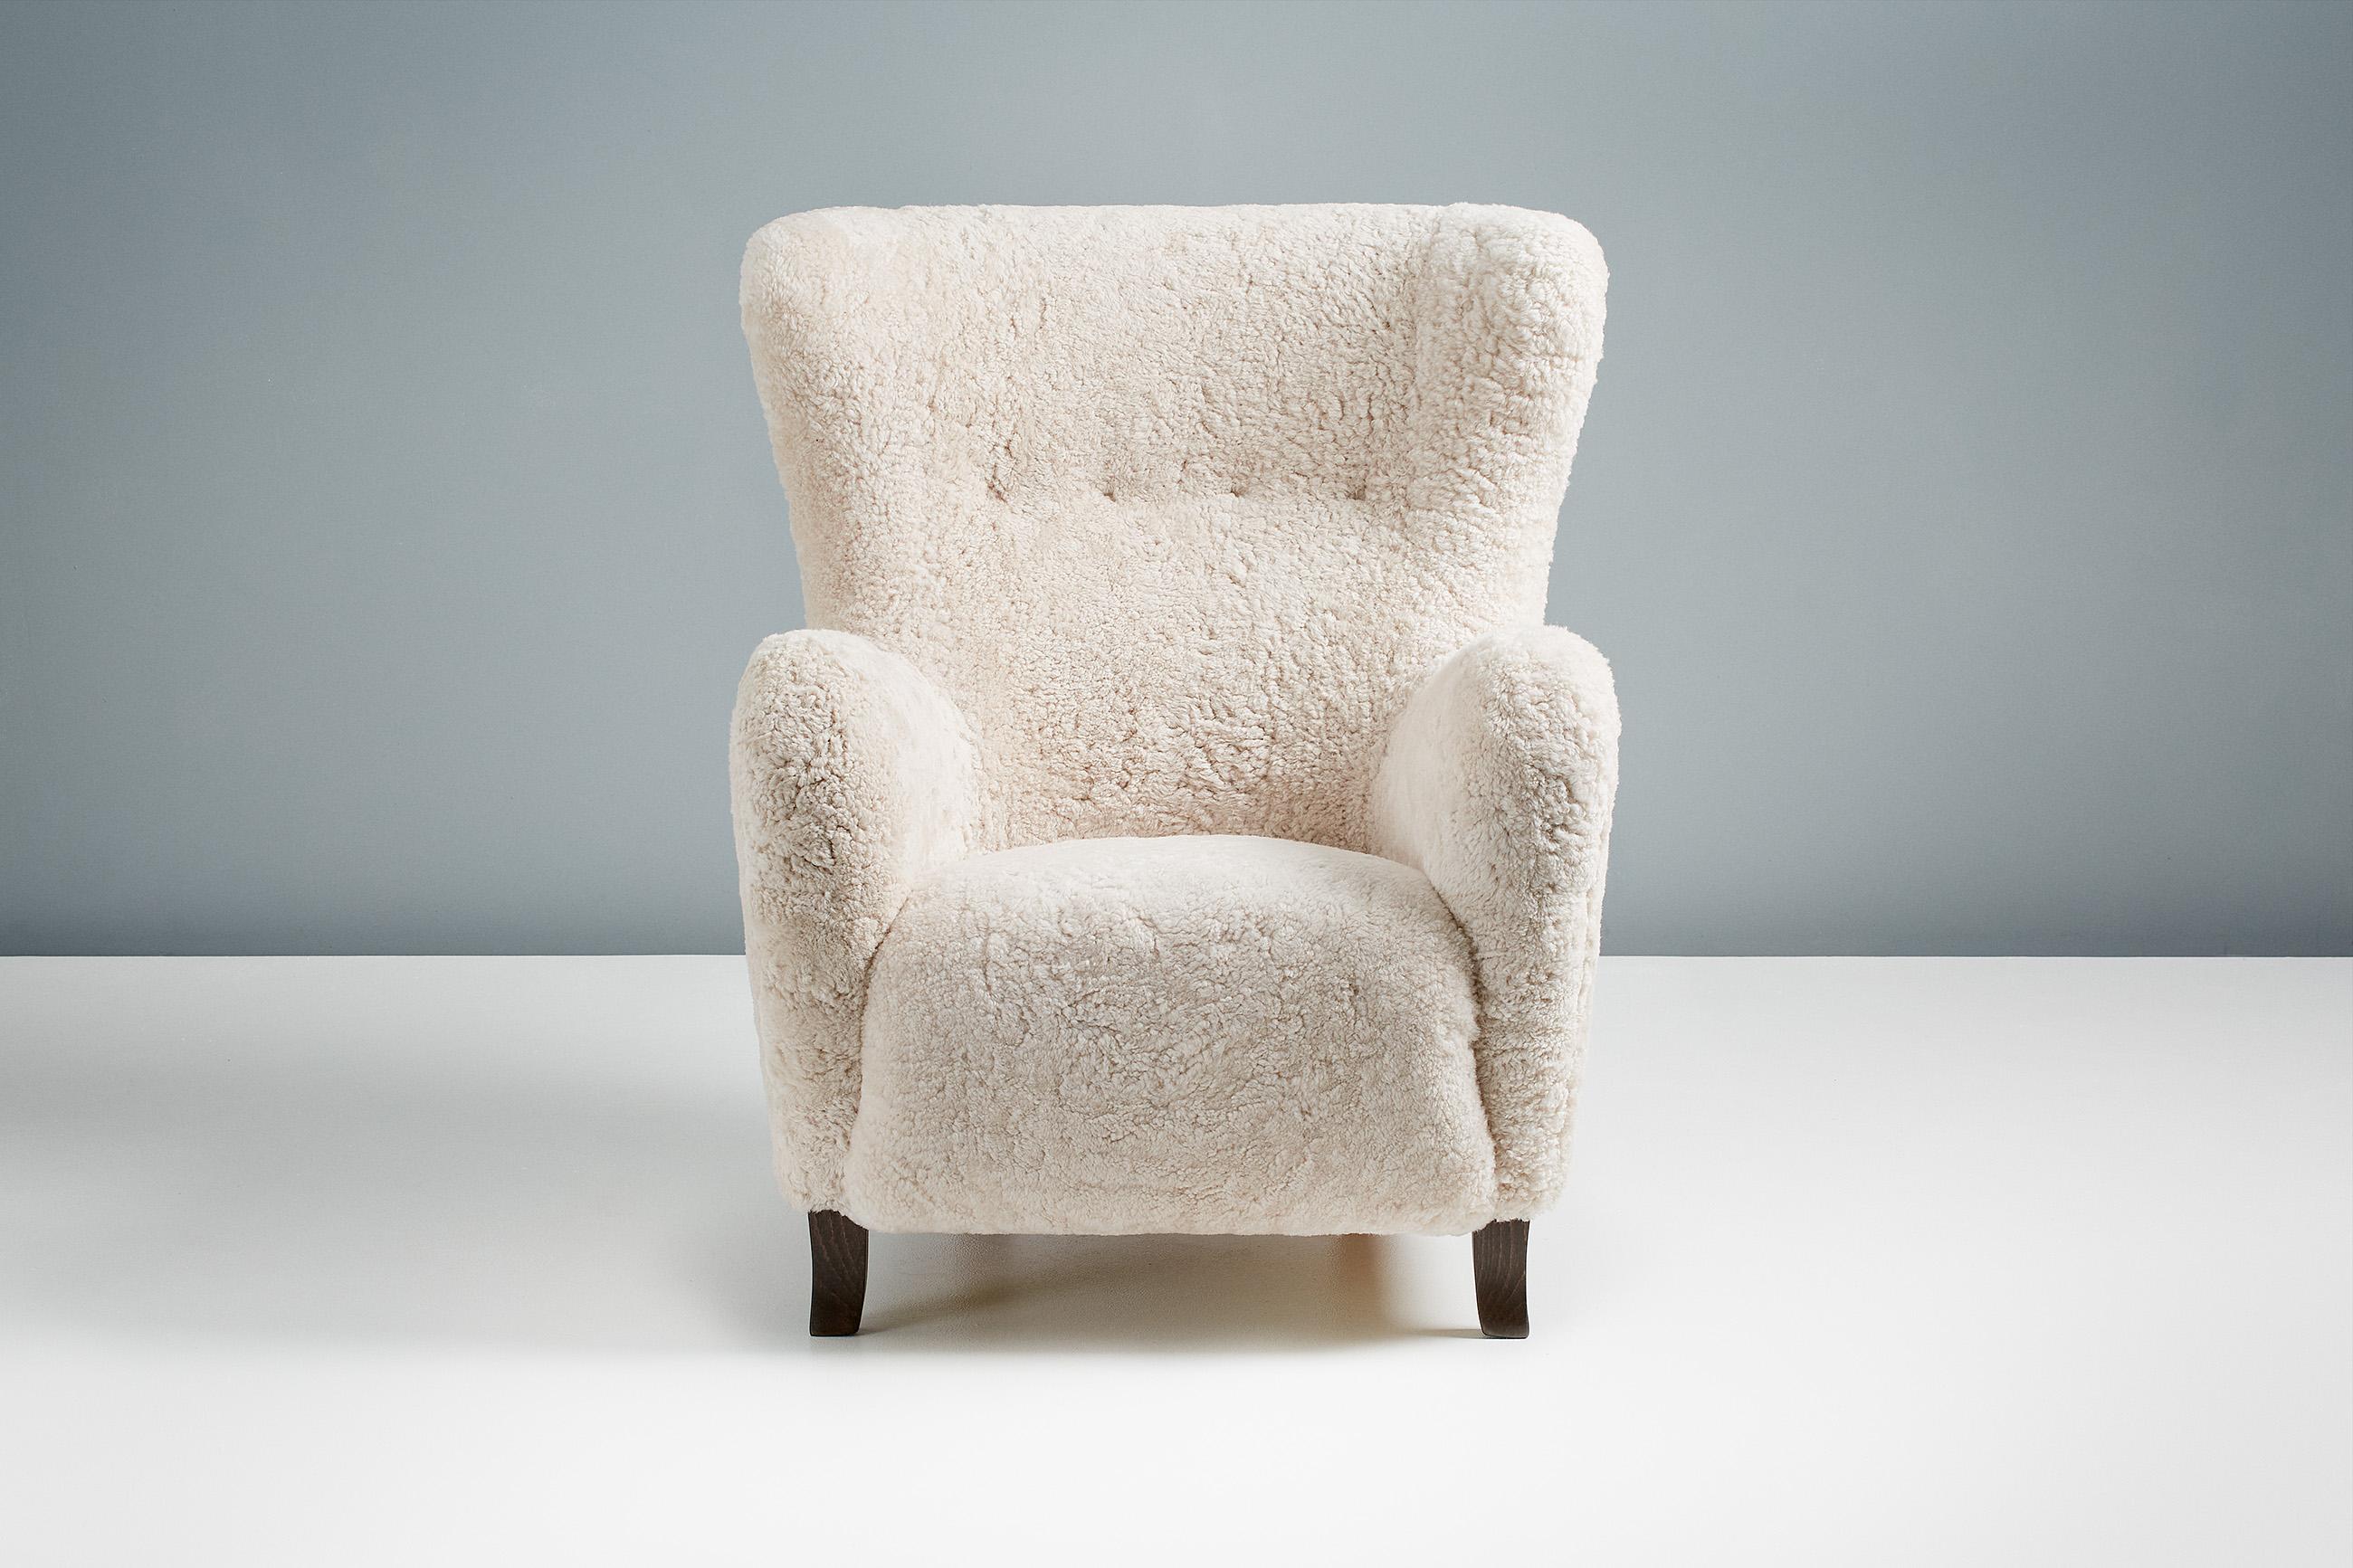 Dagmar design

Sampo wing chair

A custom-made wing chair developed & produced at our workshops in London using the highest quality materials. The frame is built from solid tulipwood with a fully sprung seat. The Sampo chair is available to